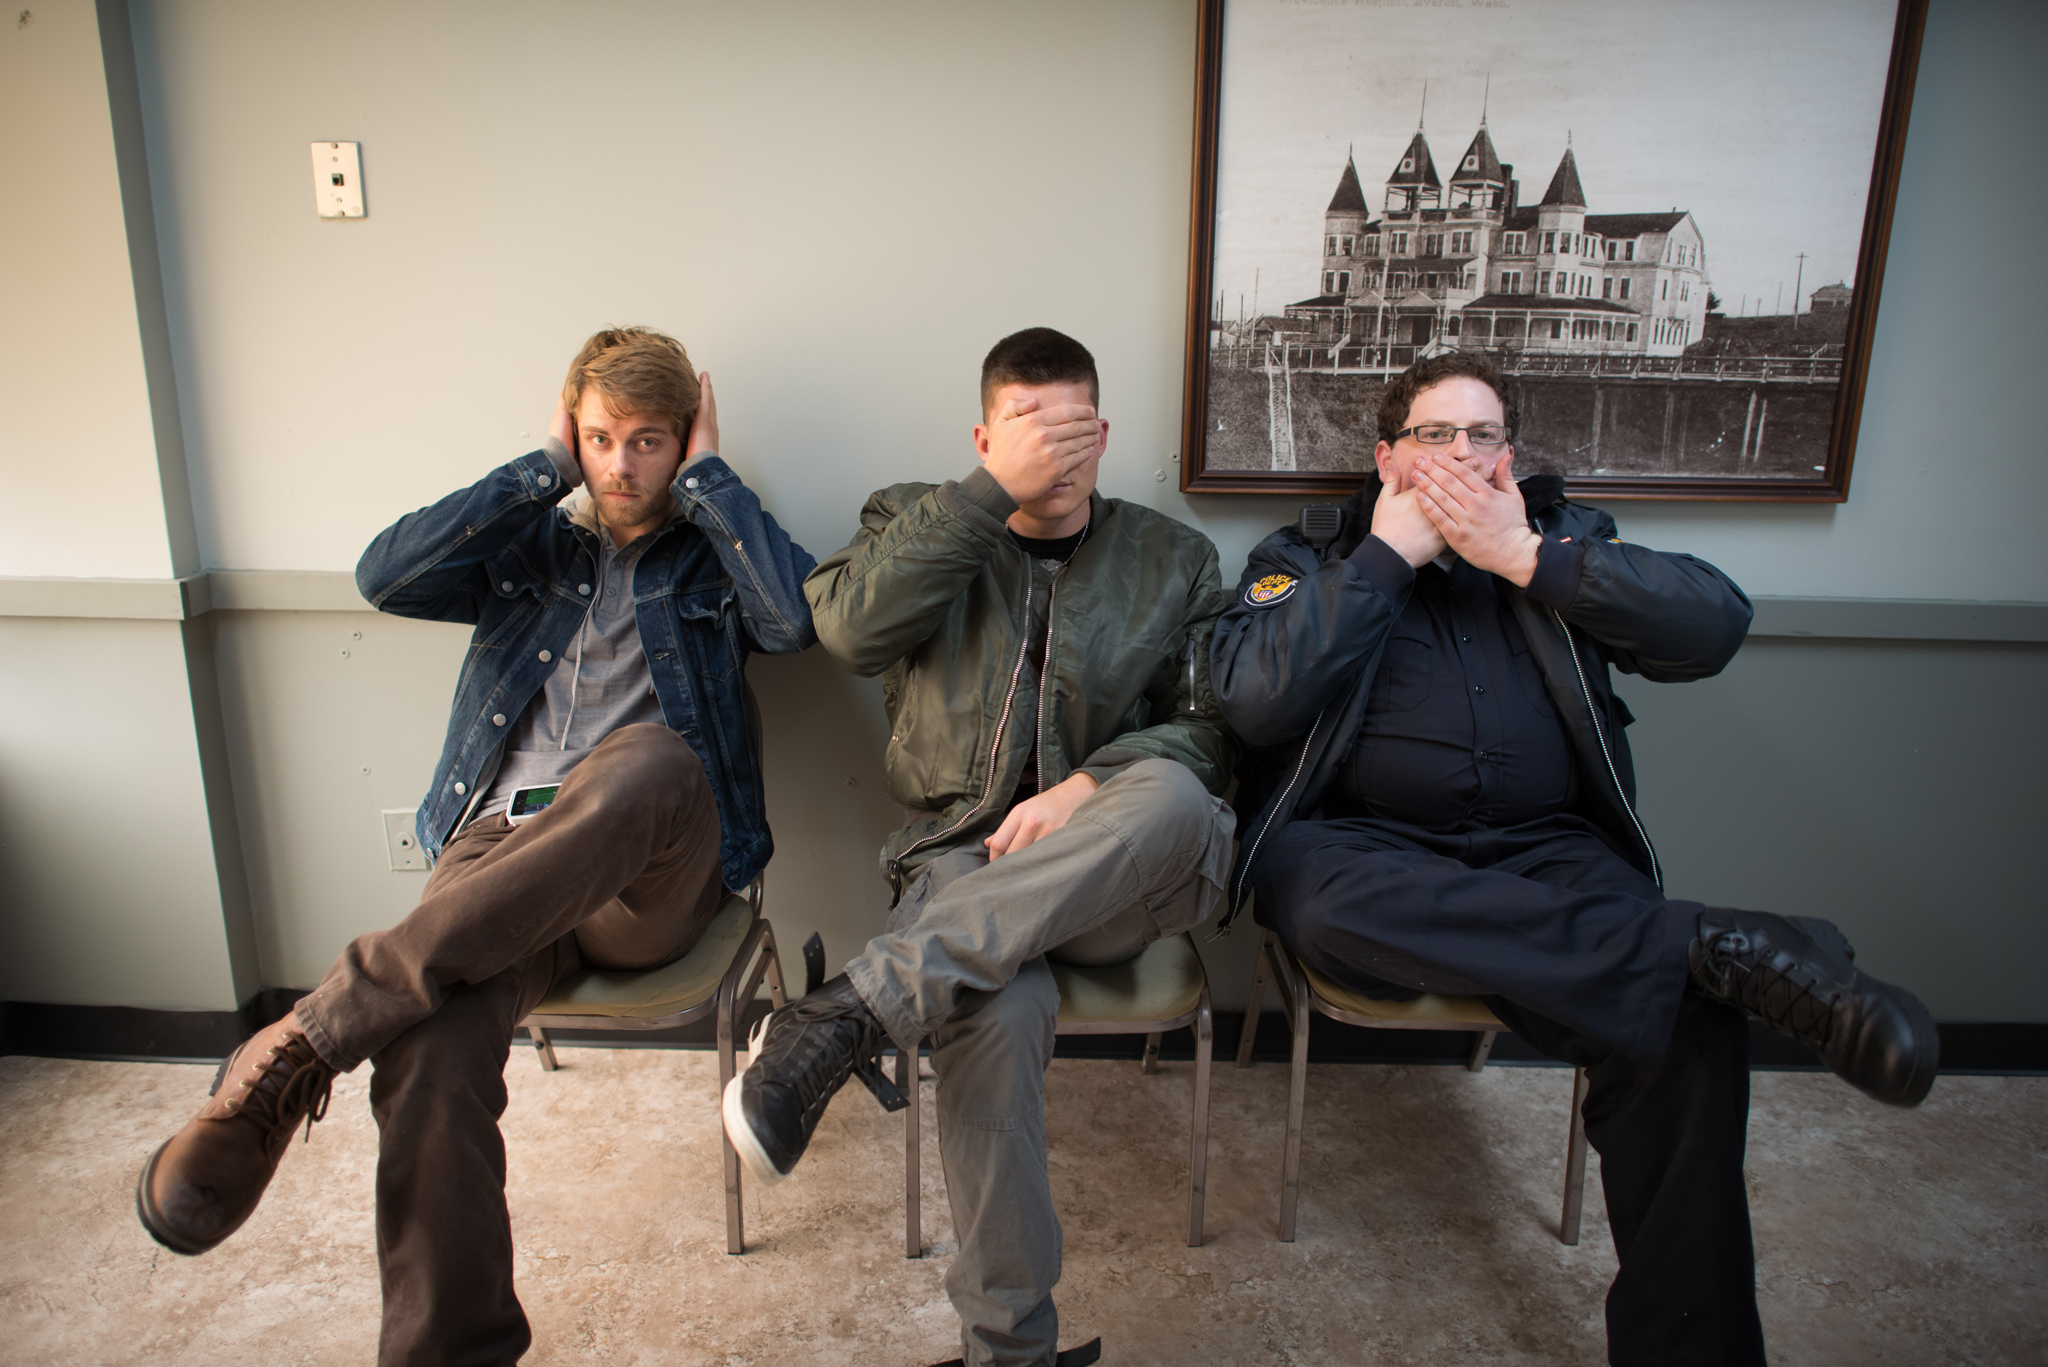 From left to right: Luke Mitchell, Zane Holtz, and Brandon Hardesty on the set of 